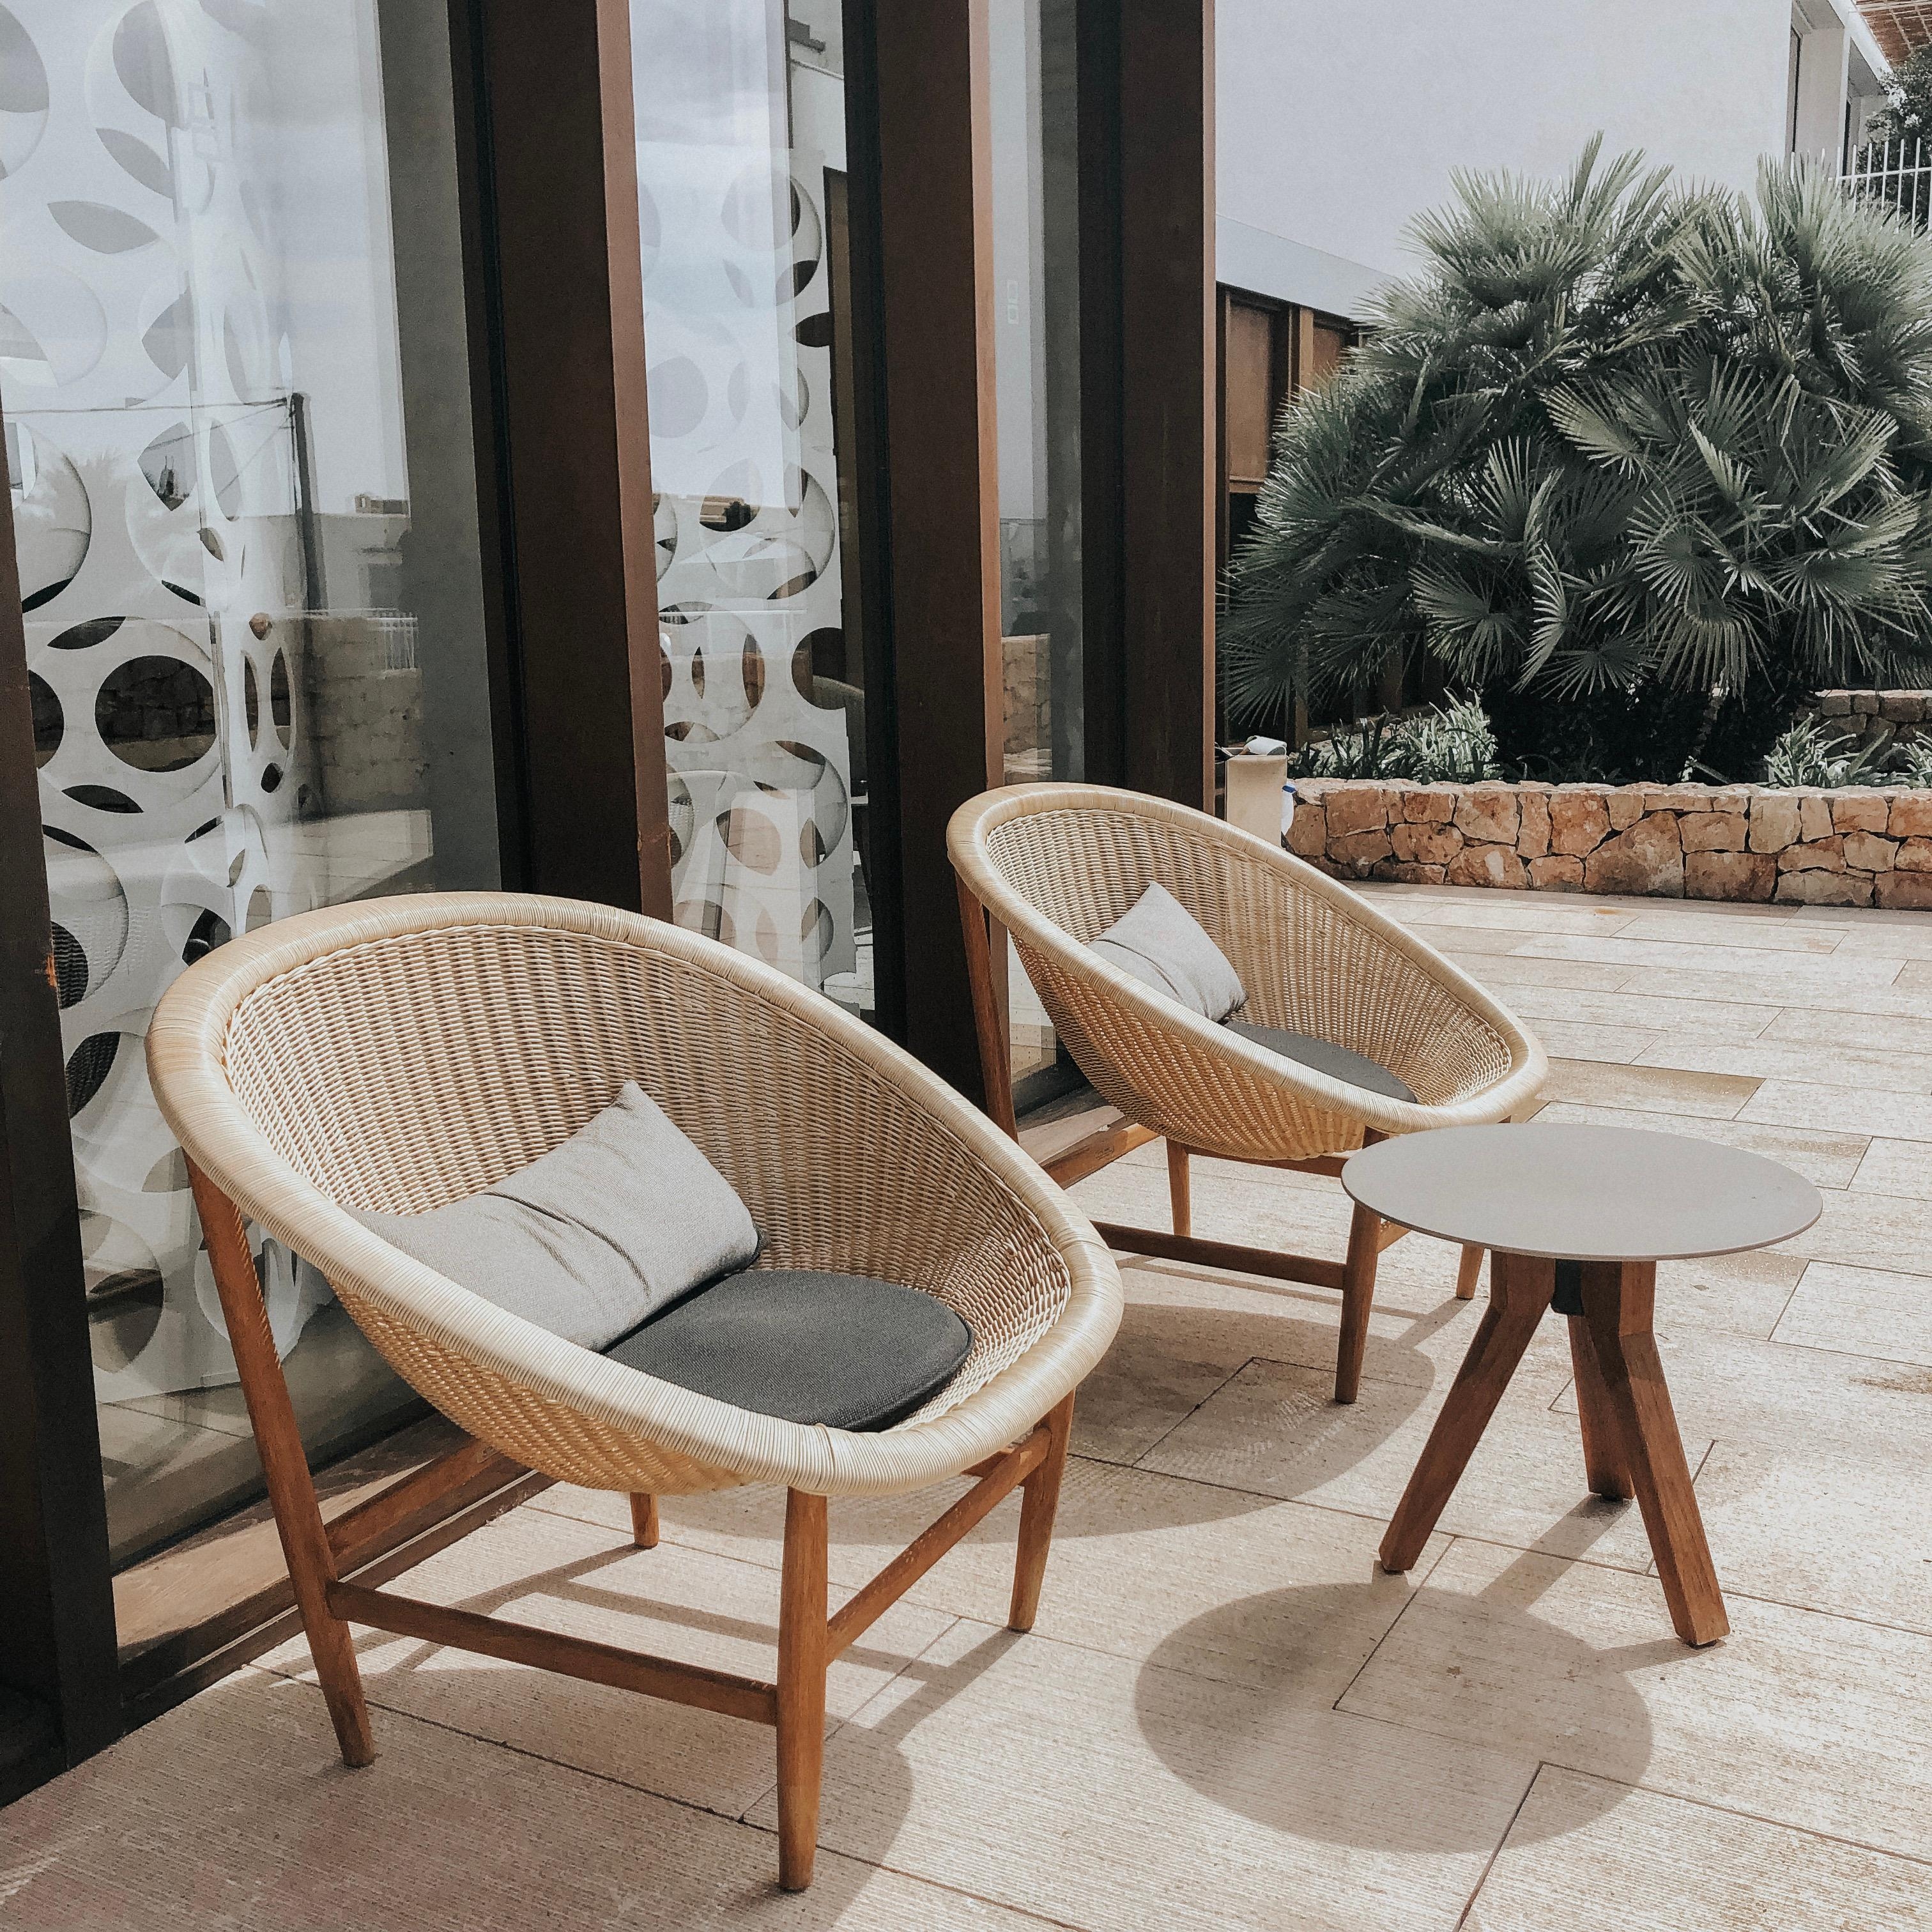 chasing light #chairs #interior #outdoor #interieur #light #poolsight #deux #interiorinspo